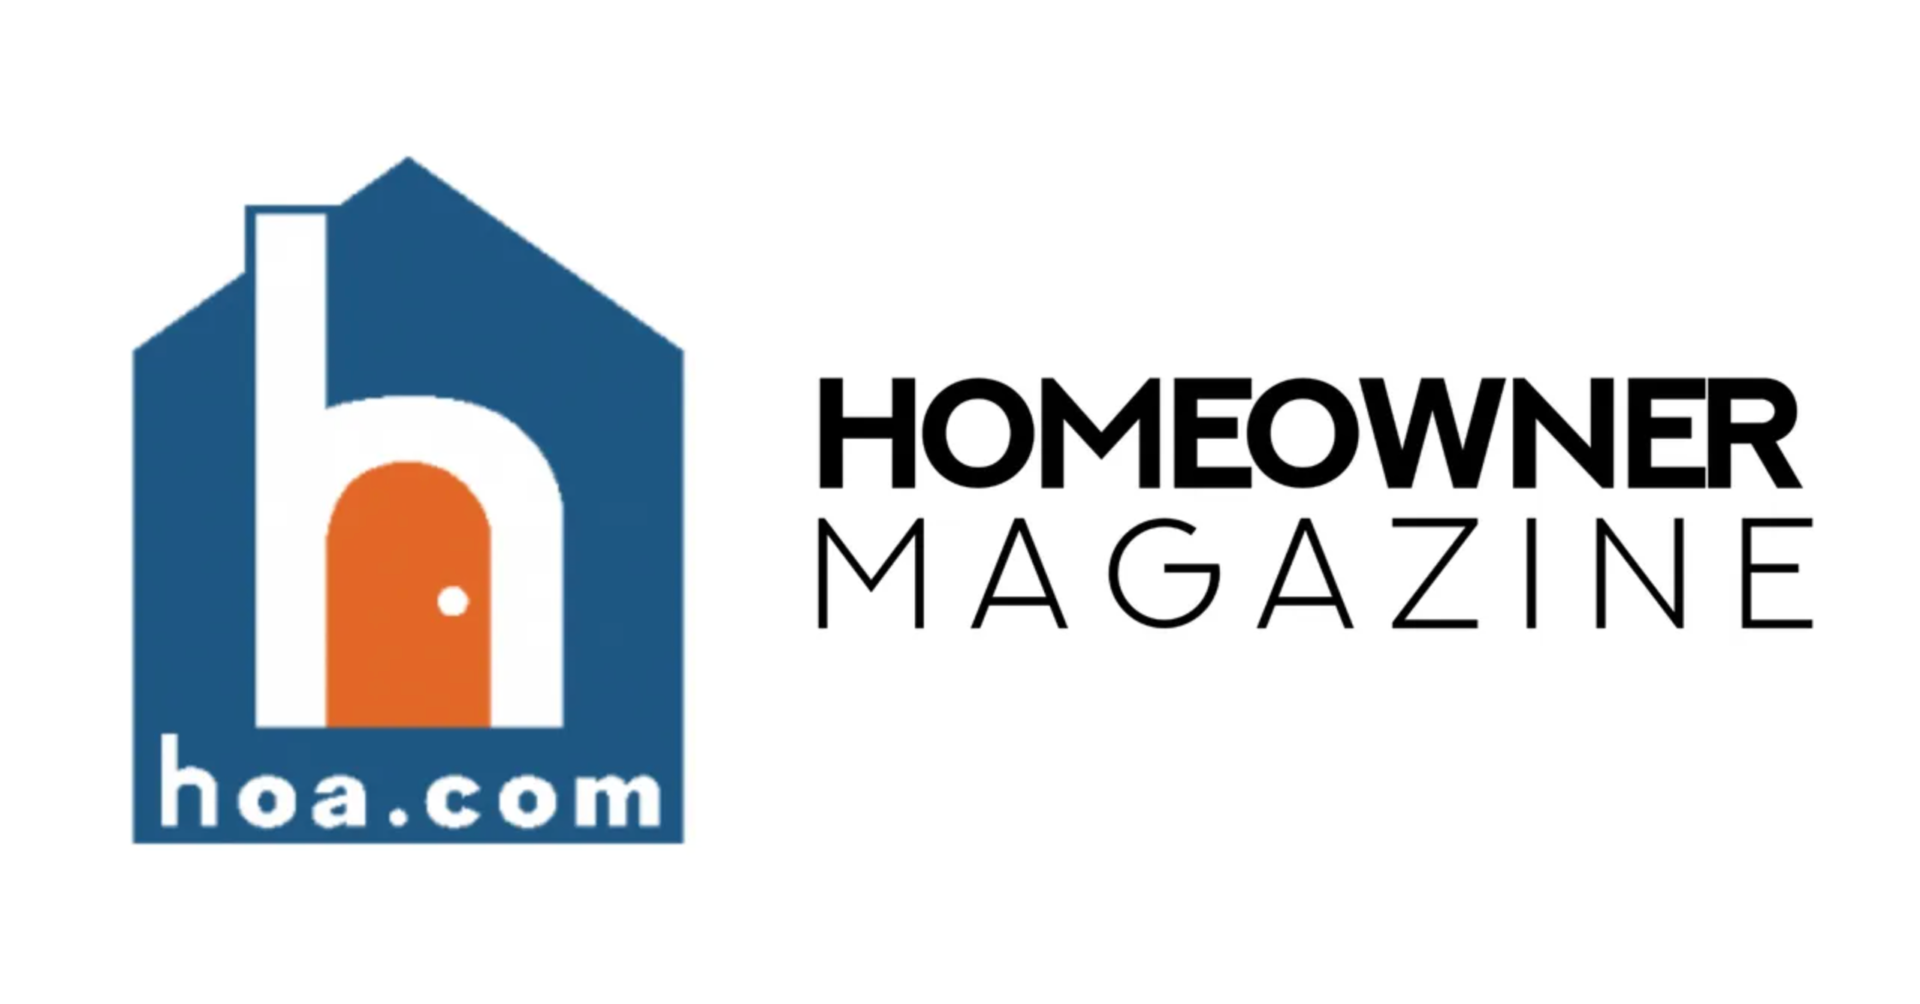 You are currently viewing Homeowner Magazine & HOA.com Announce Strategic Partnership